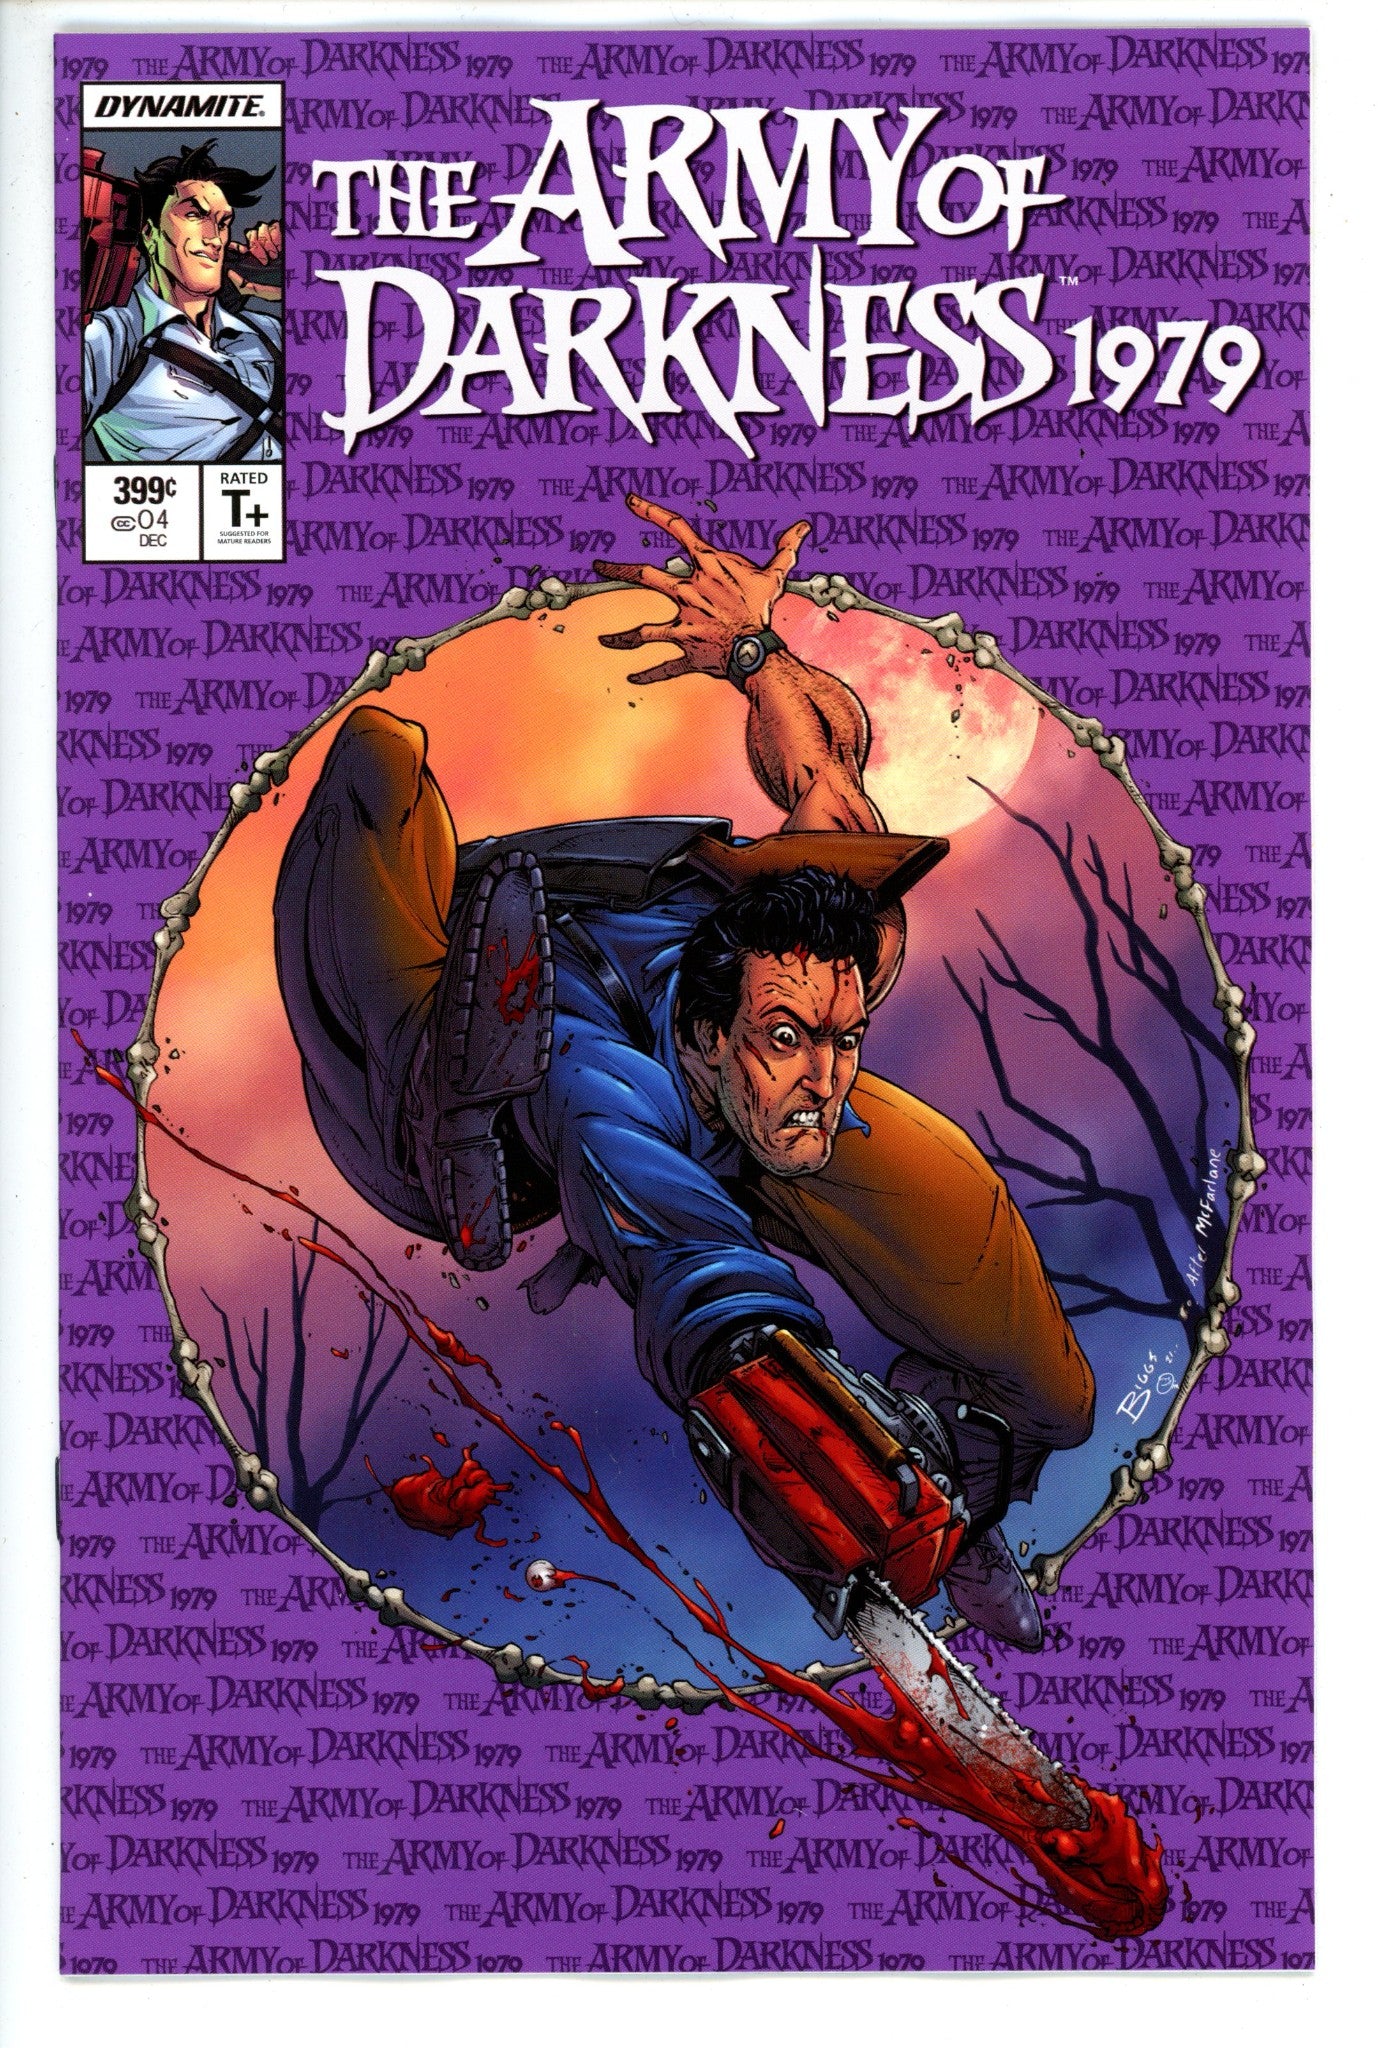 Army of Darkness 1979 4 Biggs Variant (2021)